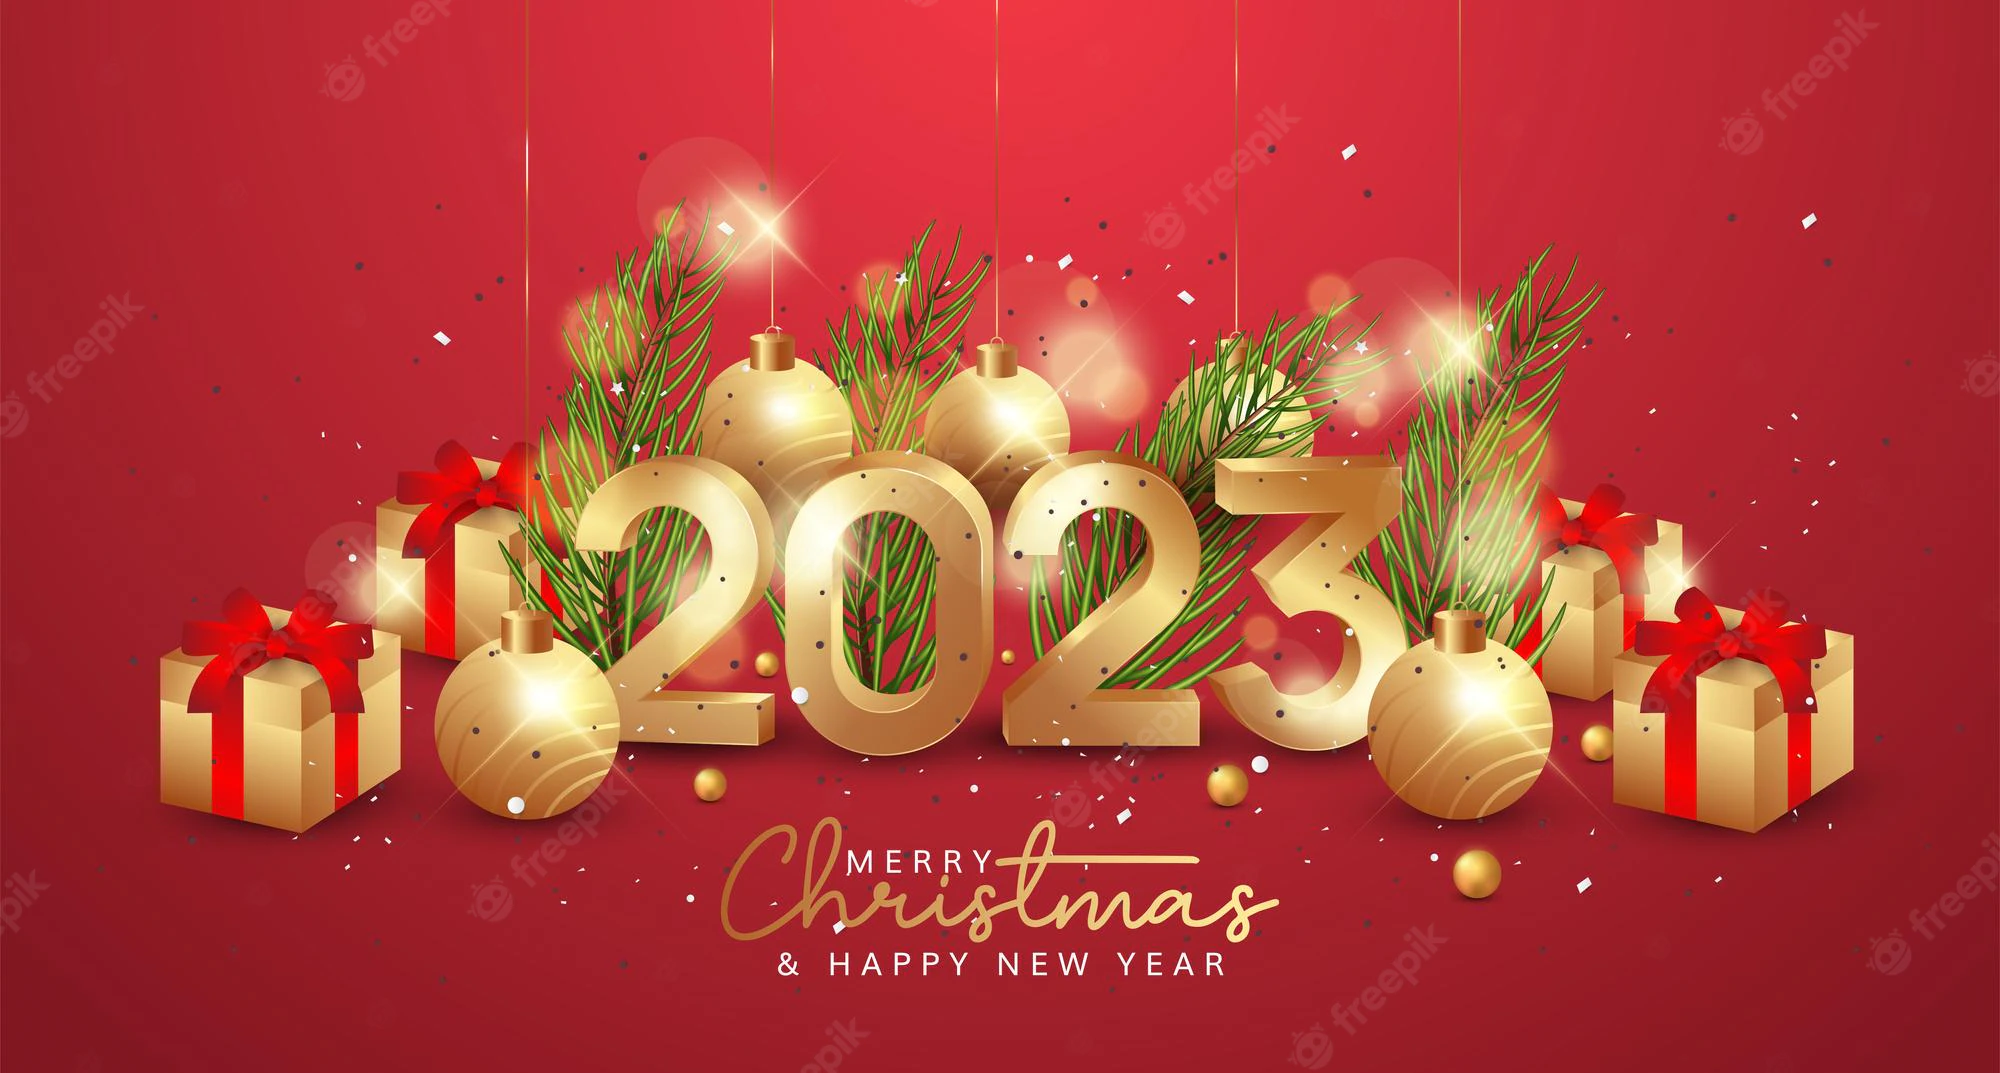 Merry Christmas and Happy New Year 2023 Images Wishes